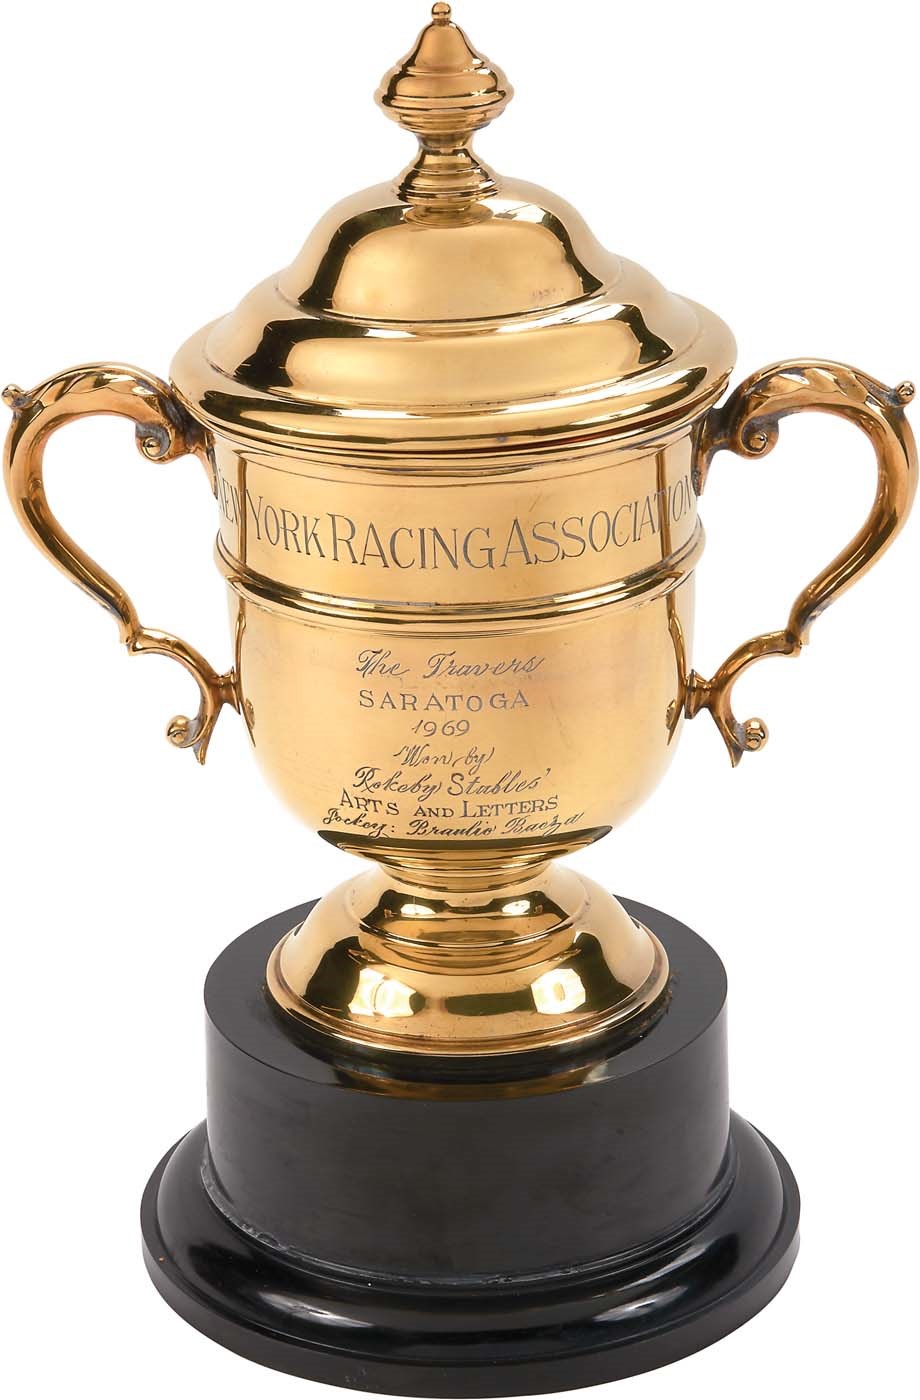 - 1969 Arts & Letters Gold Plated Travers Winning Trophy Cup from the Personal Collection of Braulio Baeza